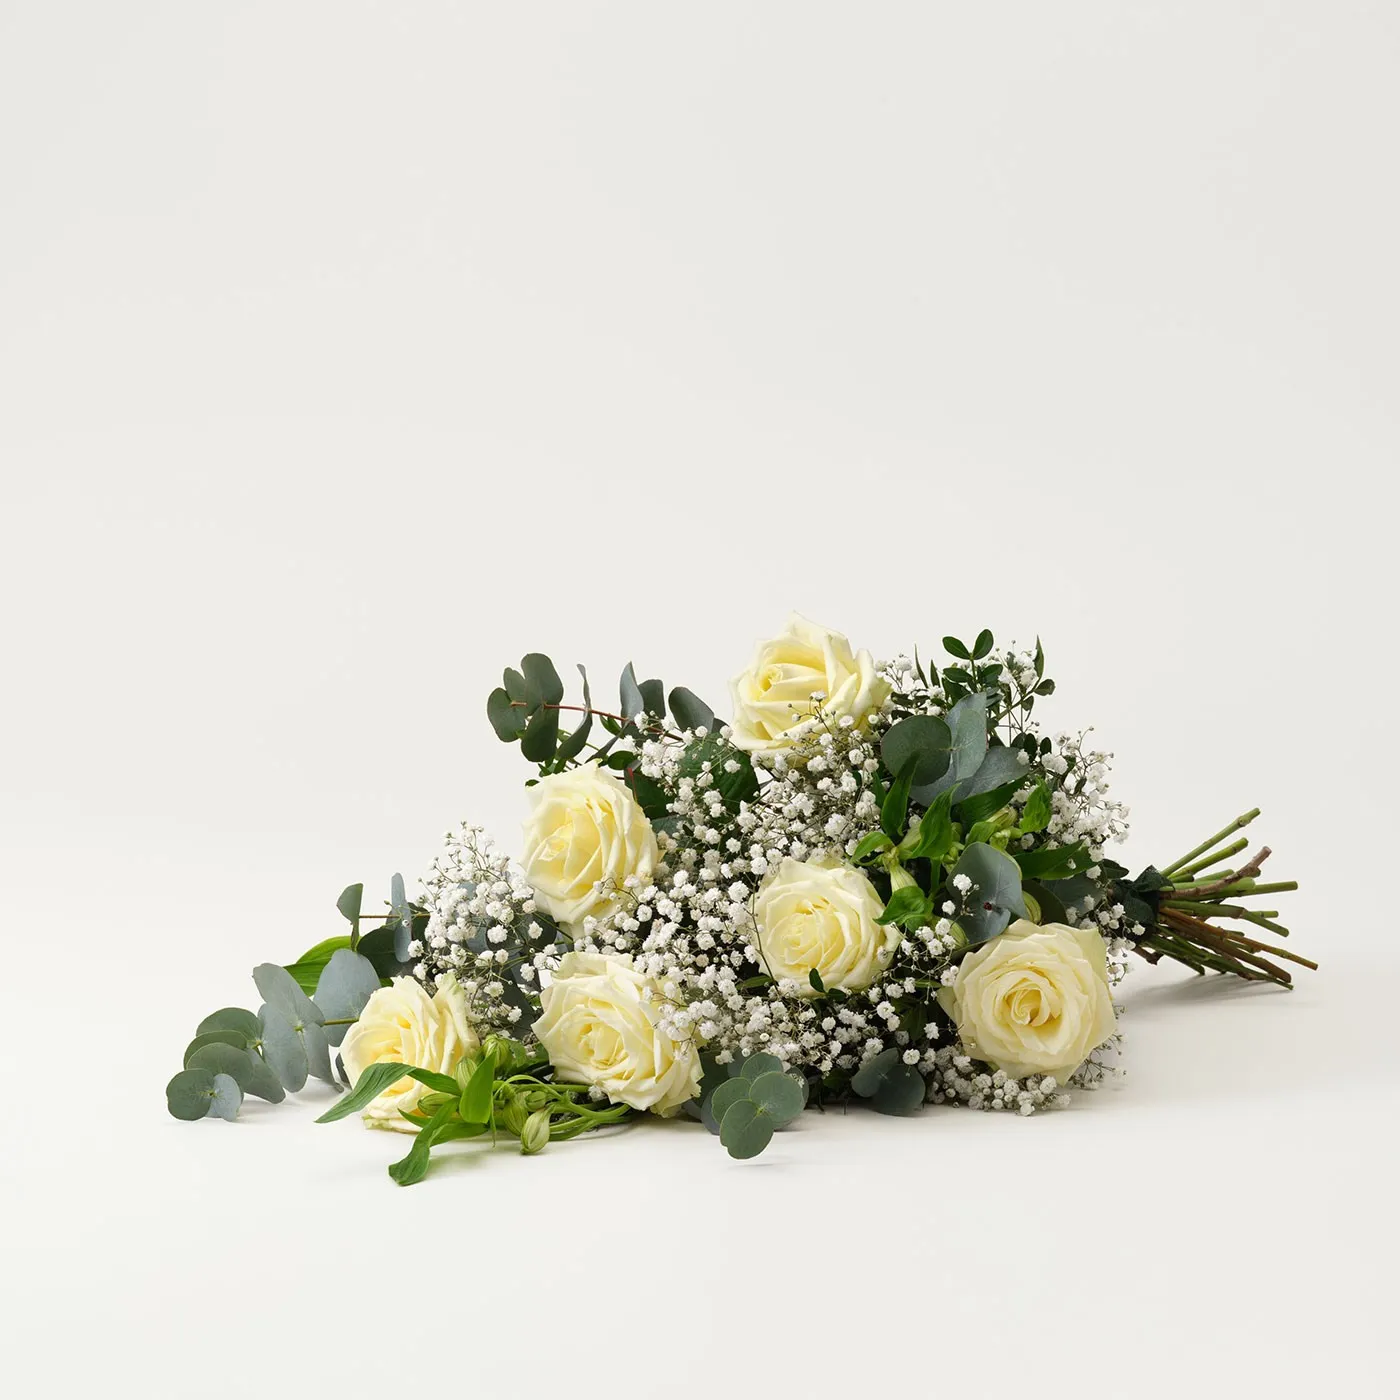 Funeral bouquet in white - Sweden